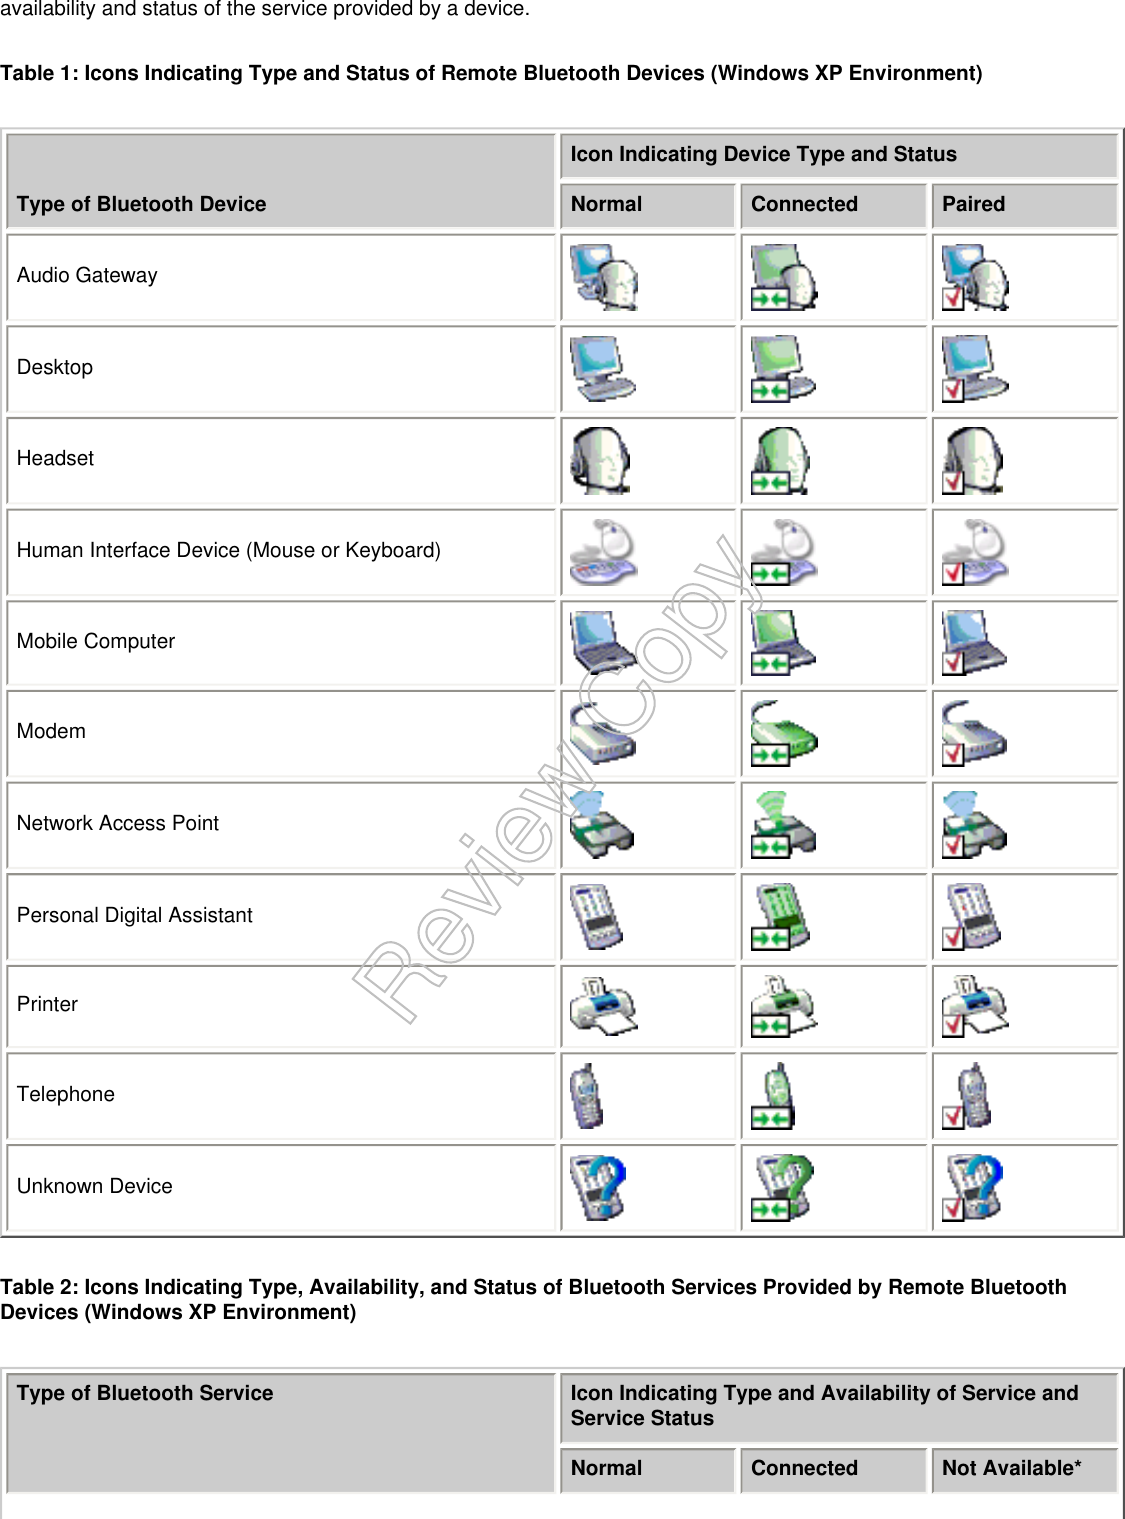 availability and status of the service provided by a device.Table 1: Icons Indicating Type and Status of Remote Bluetooth Devices (Windows XP Environment)Type of Bluetooth DeviceIcon Indicating Device Type and StatusNormal Connected PairedAudio GatewayDesktopHeadsetHuman Interface Device (Mouse or Keyboard)Mobile ComputerModemNetwork Access PointPersonal Digital AssistantPrinterTelephoneUnknown DeviceTable 2: Icons Indicating Type, Availability, and Status of Bluetooth Services Provided by Remote Bluetooth Devices (Windows XP Environment)Type of Bluetooth Service Icon Indicating Type and Availability of Service and Service StatusNormal Connected Not Available*Review Copy